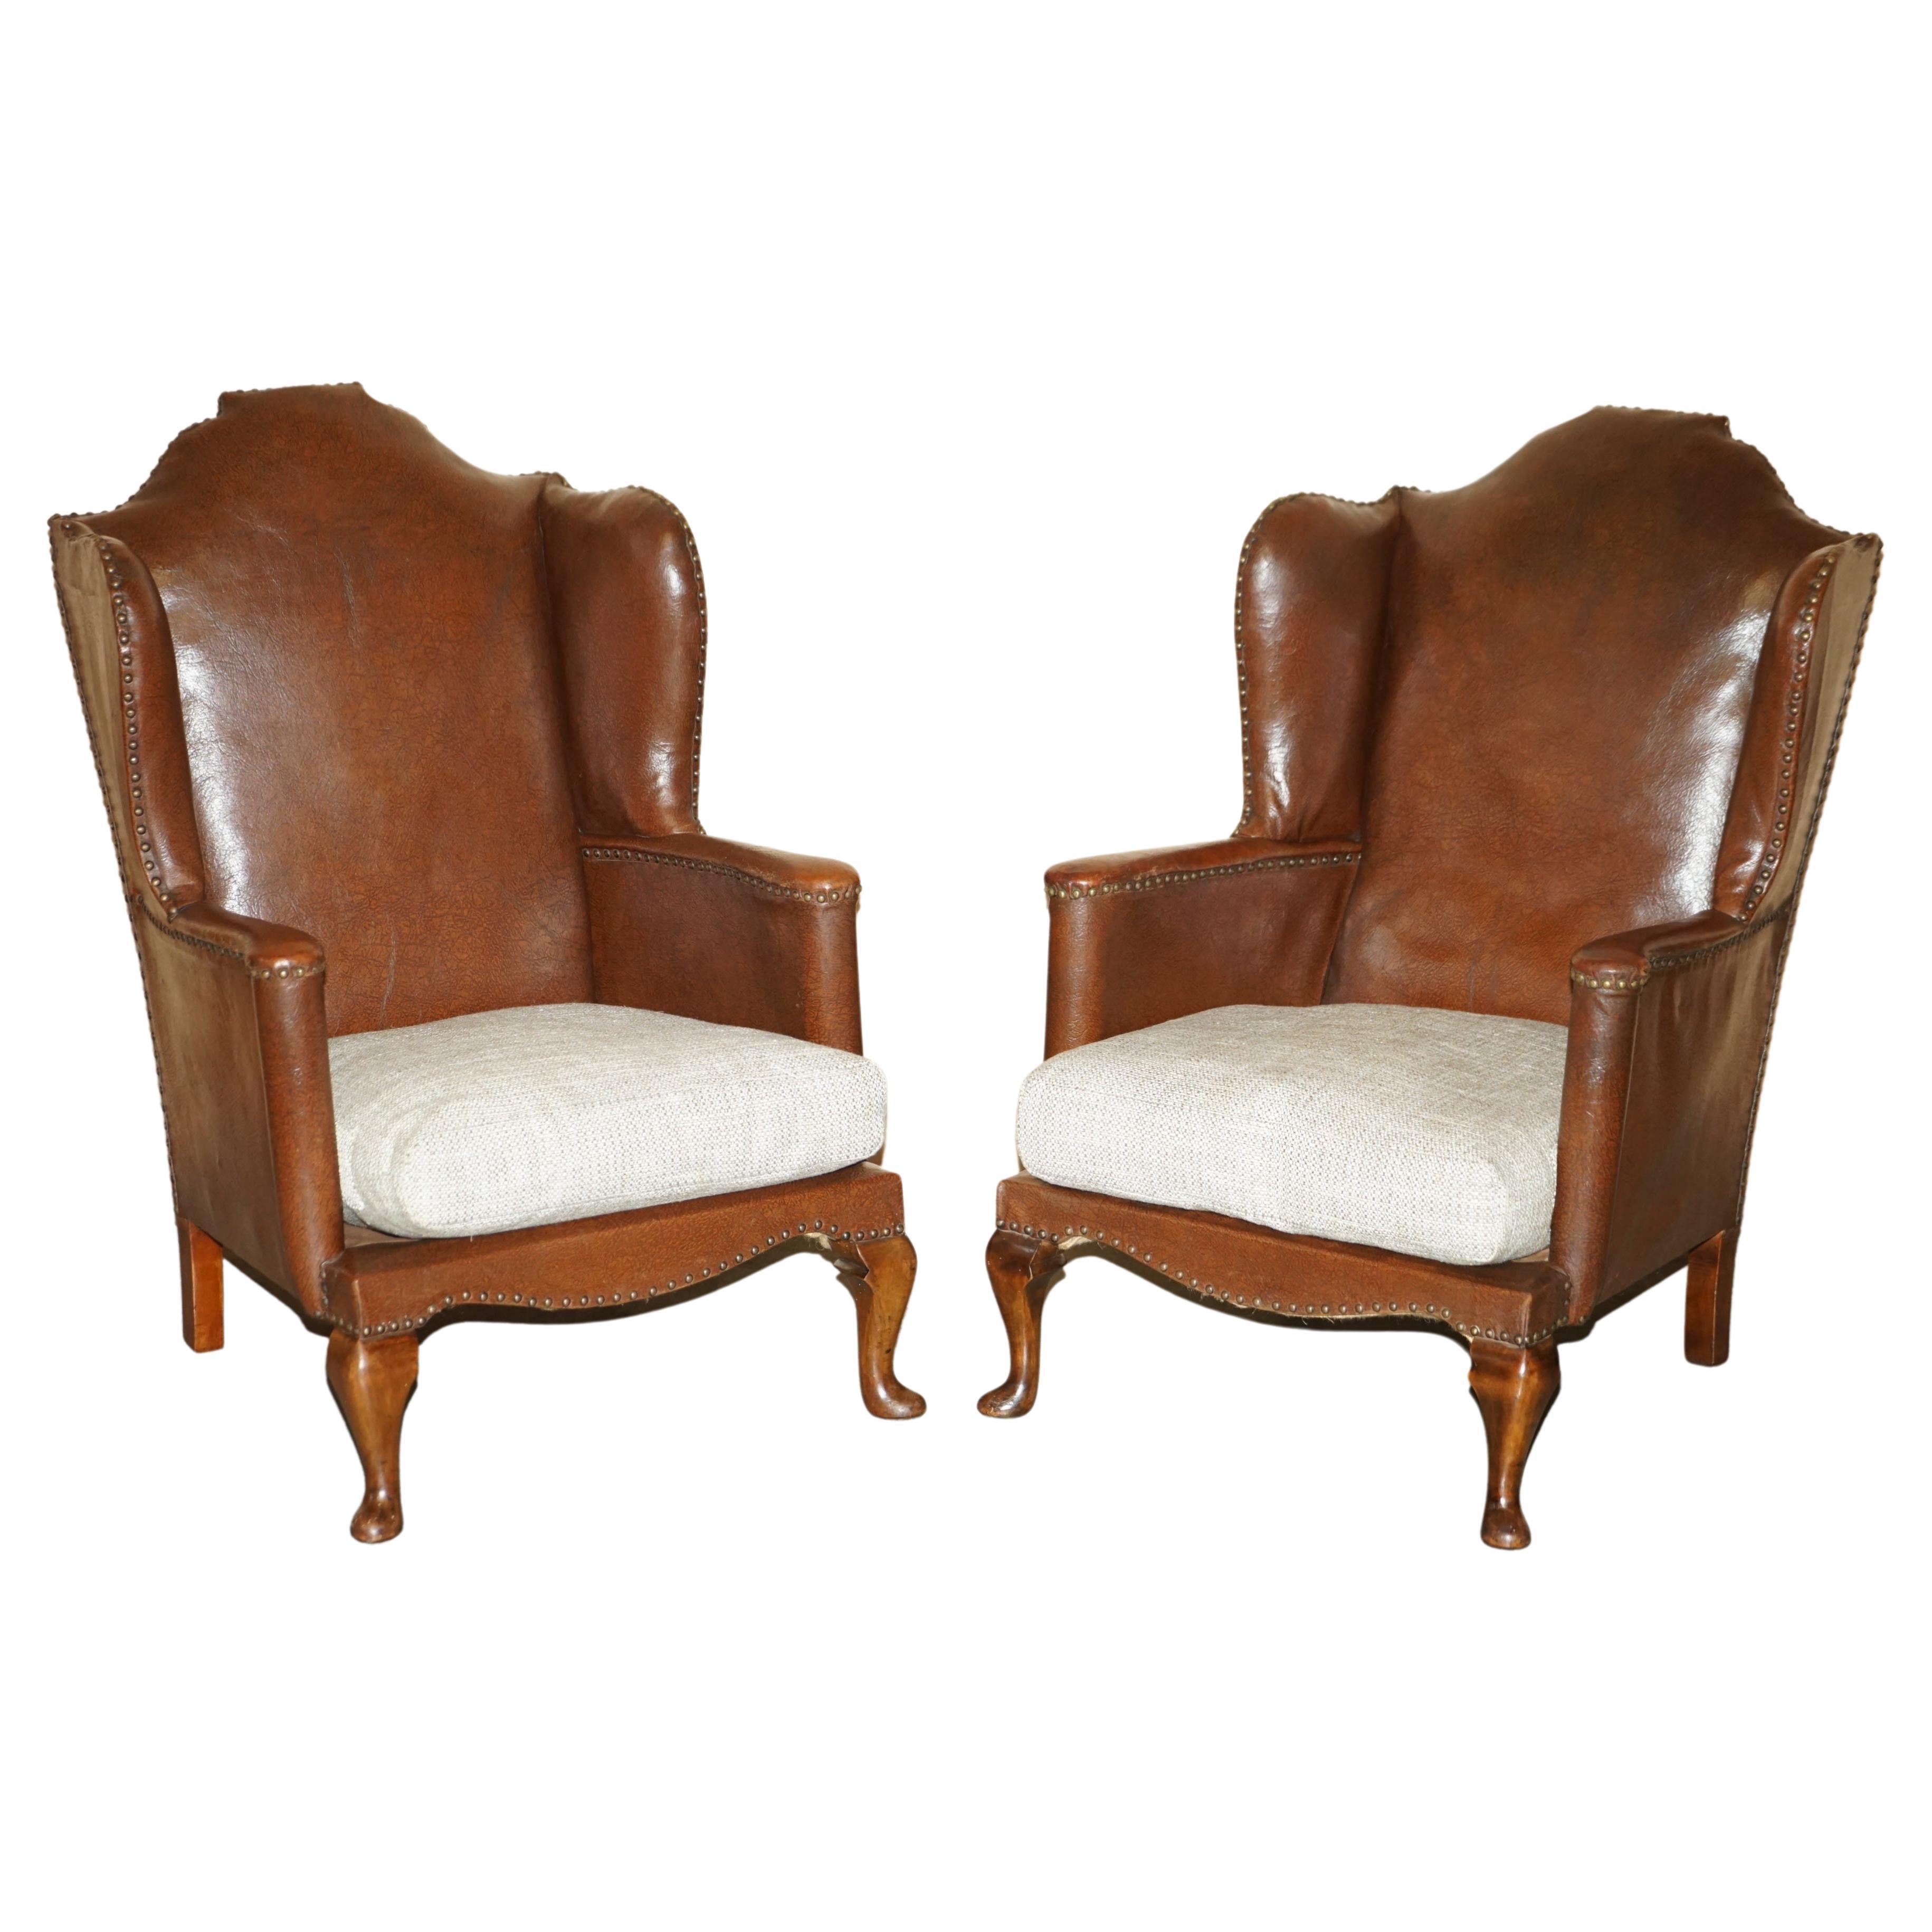 Antique Pair of circa 1880 William Morris Carved Legged Wingback Armchairs For Sale